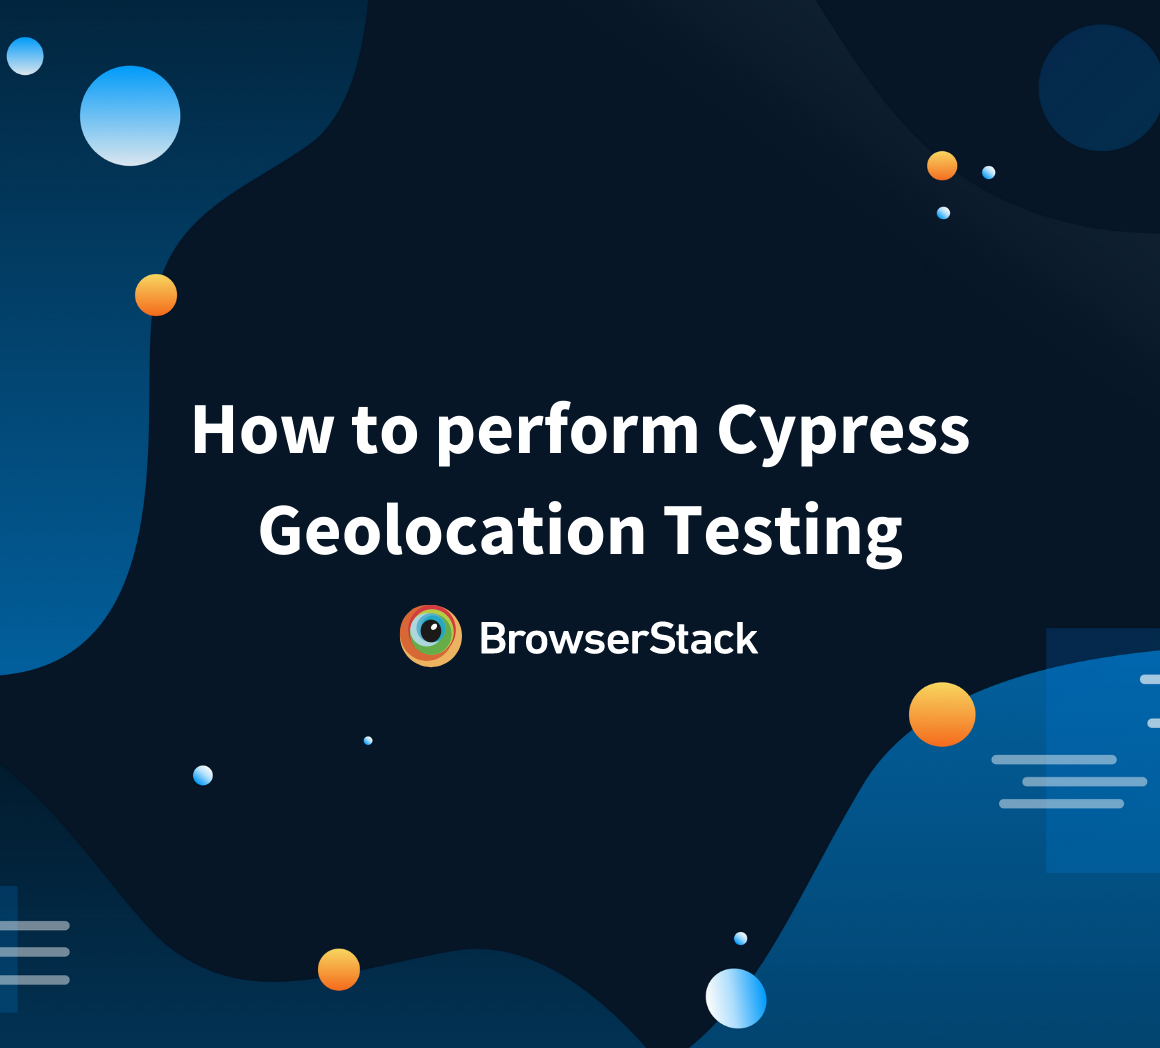 How to perform Cypress Geolocation Testing